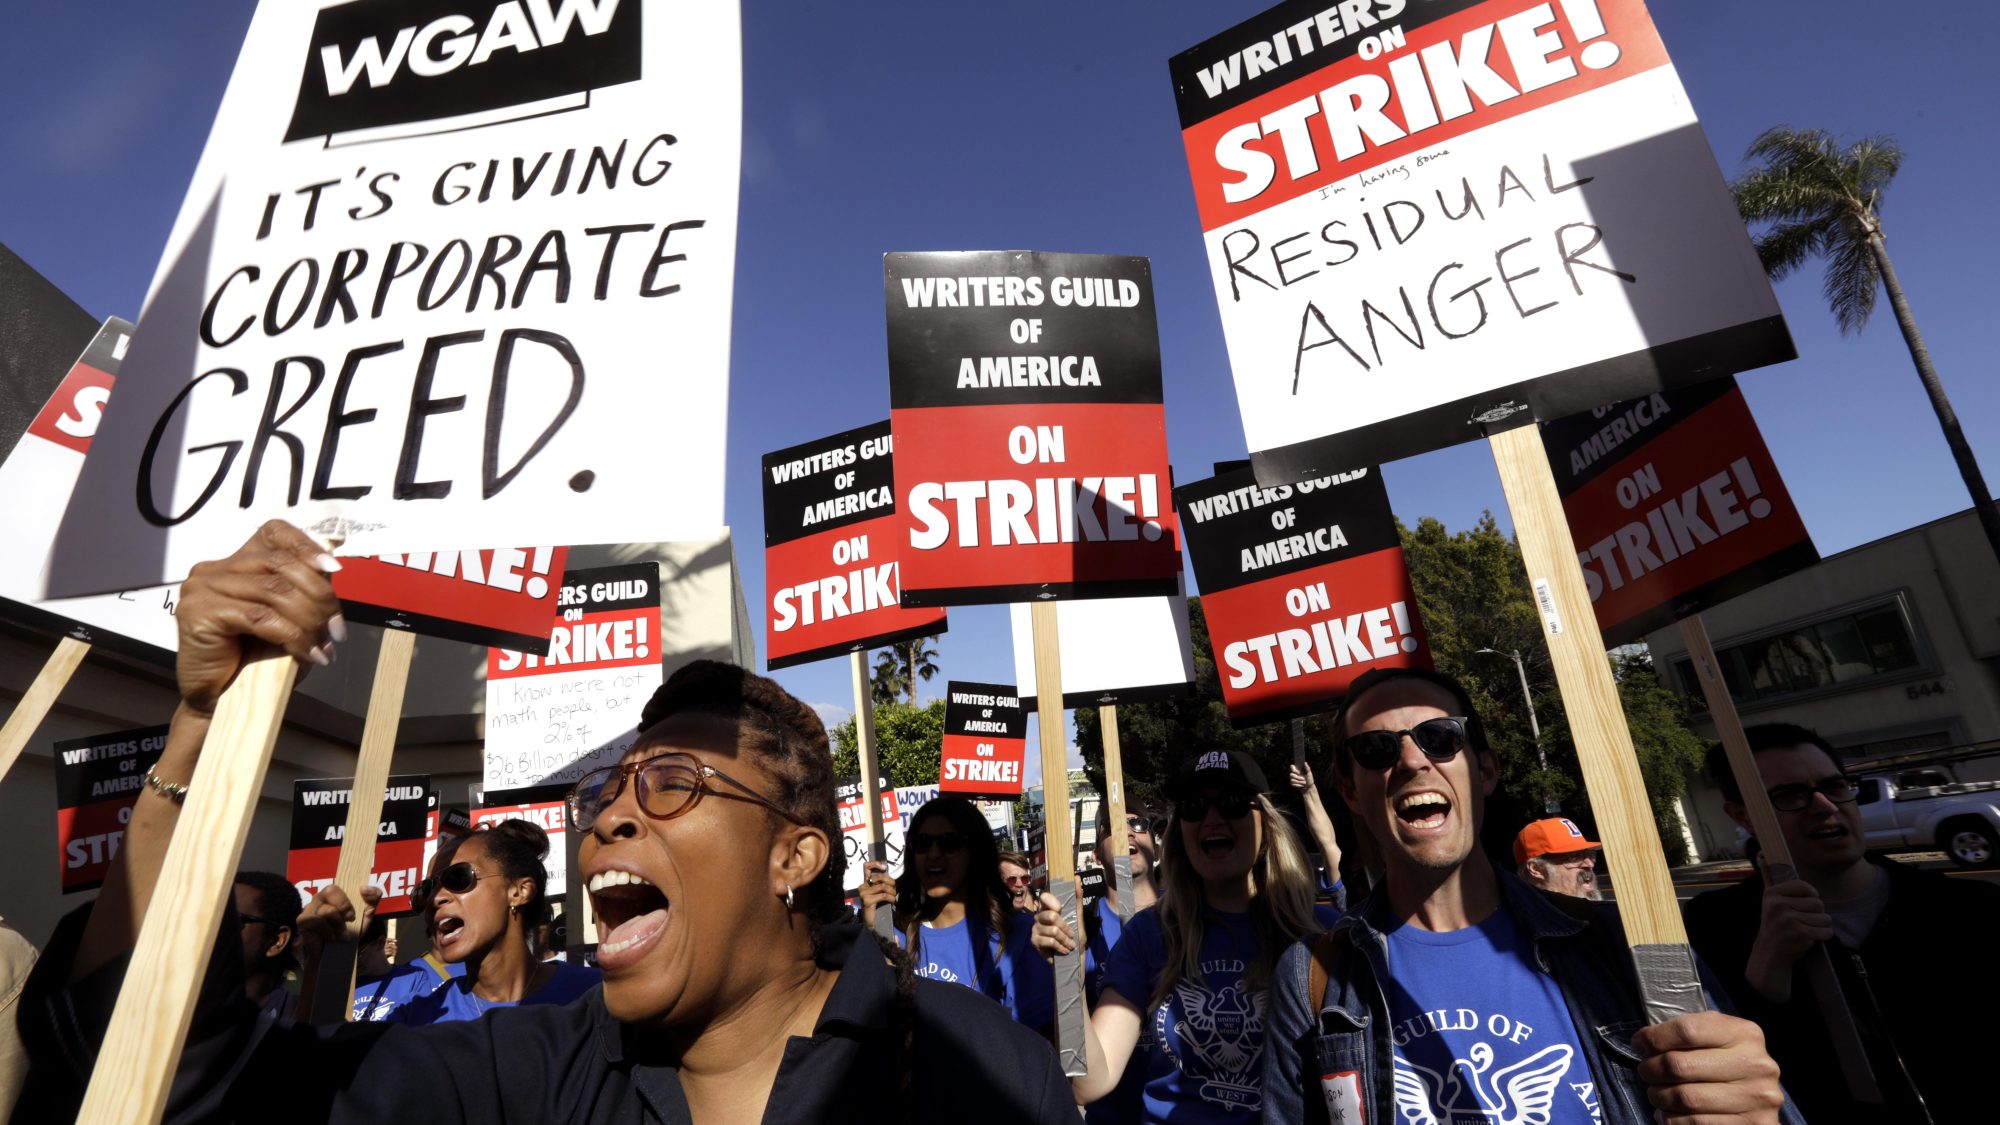 Actor and writer Daheli Hall, left, joins WGA members as they cheer on the first day of their strike in front of Paramount Studios in Hollywood on May 2, 2023.